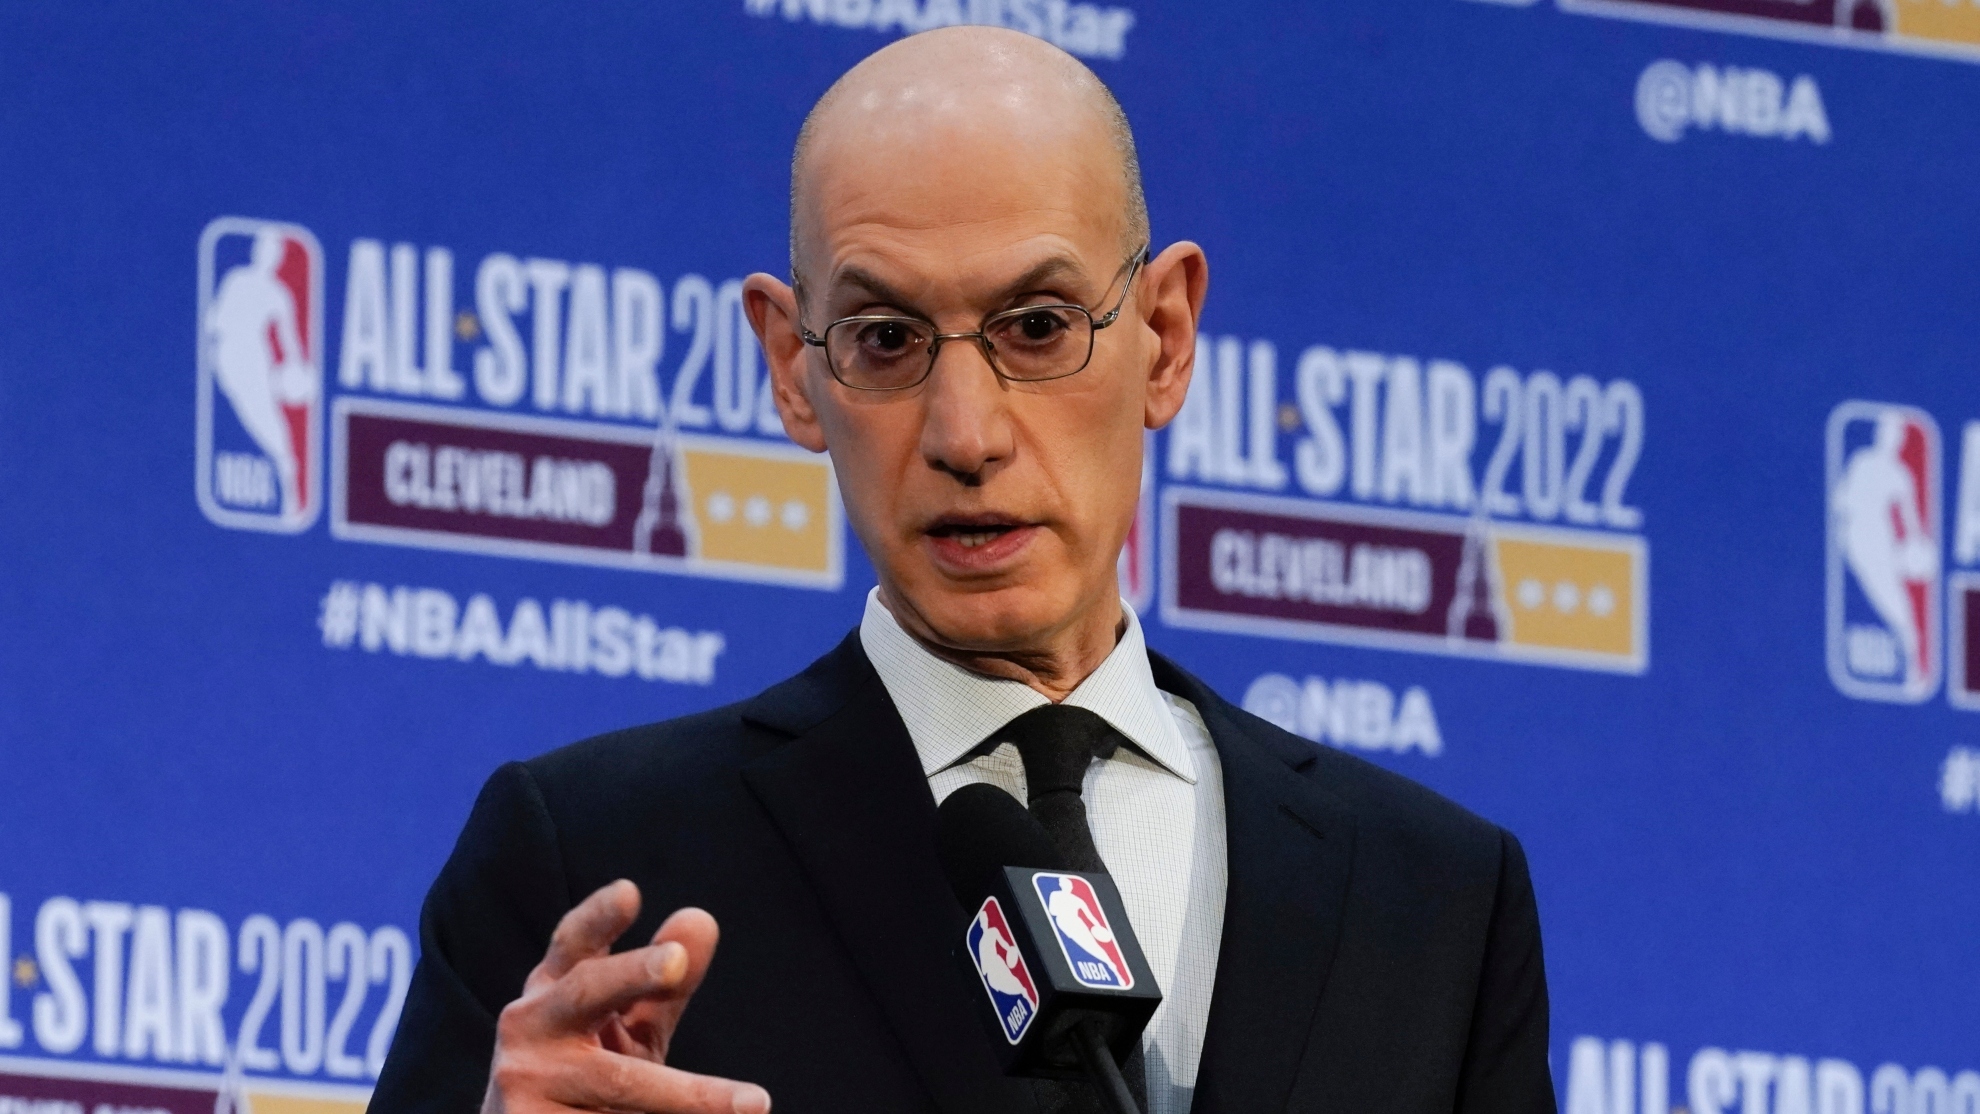 What Is Adam Silver's Net Worth? Know About His Personal & Professional Life!